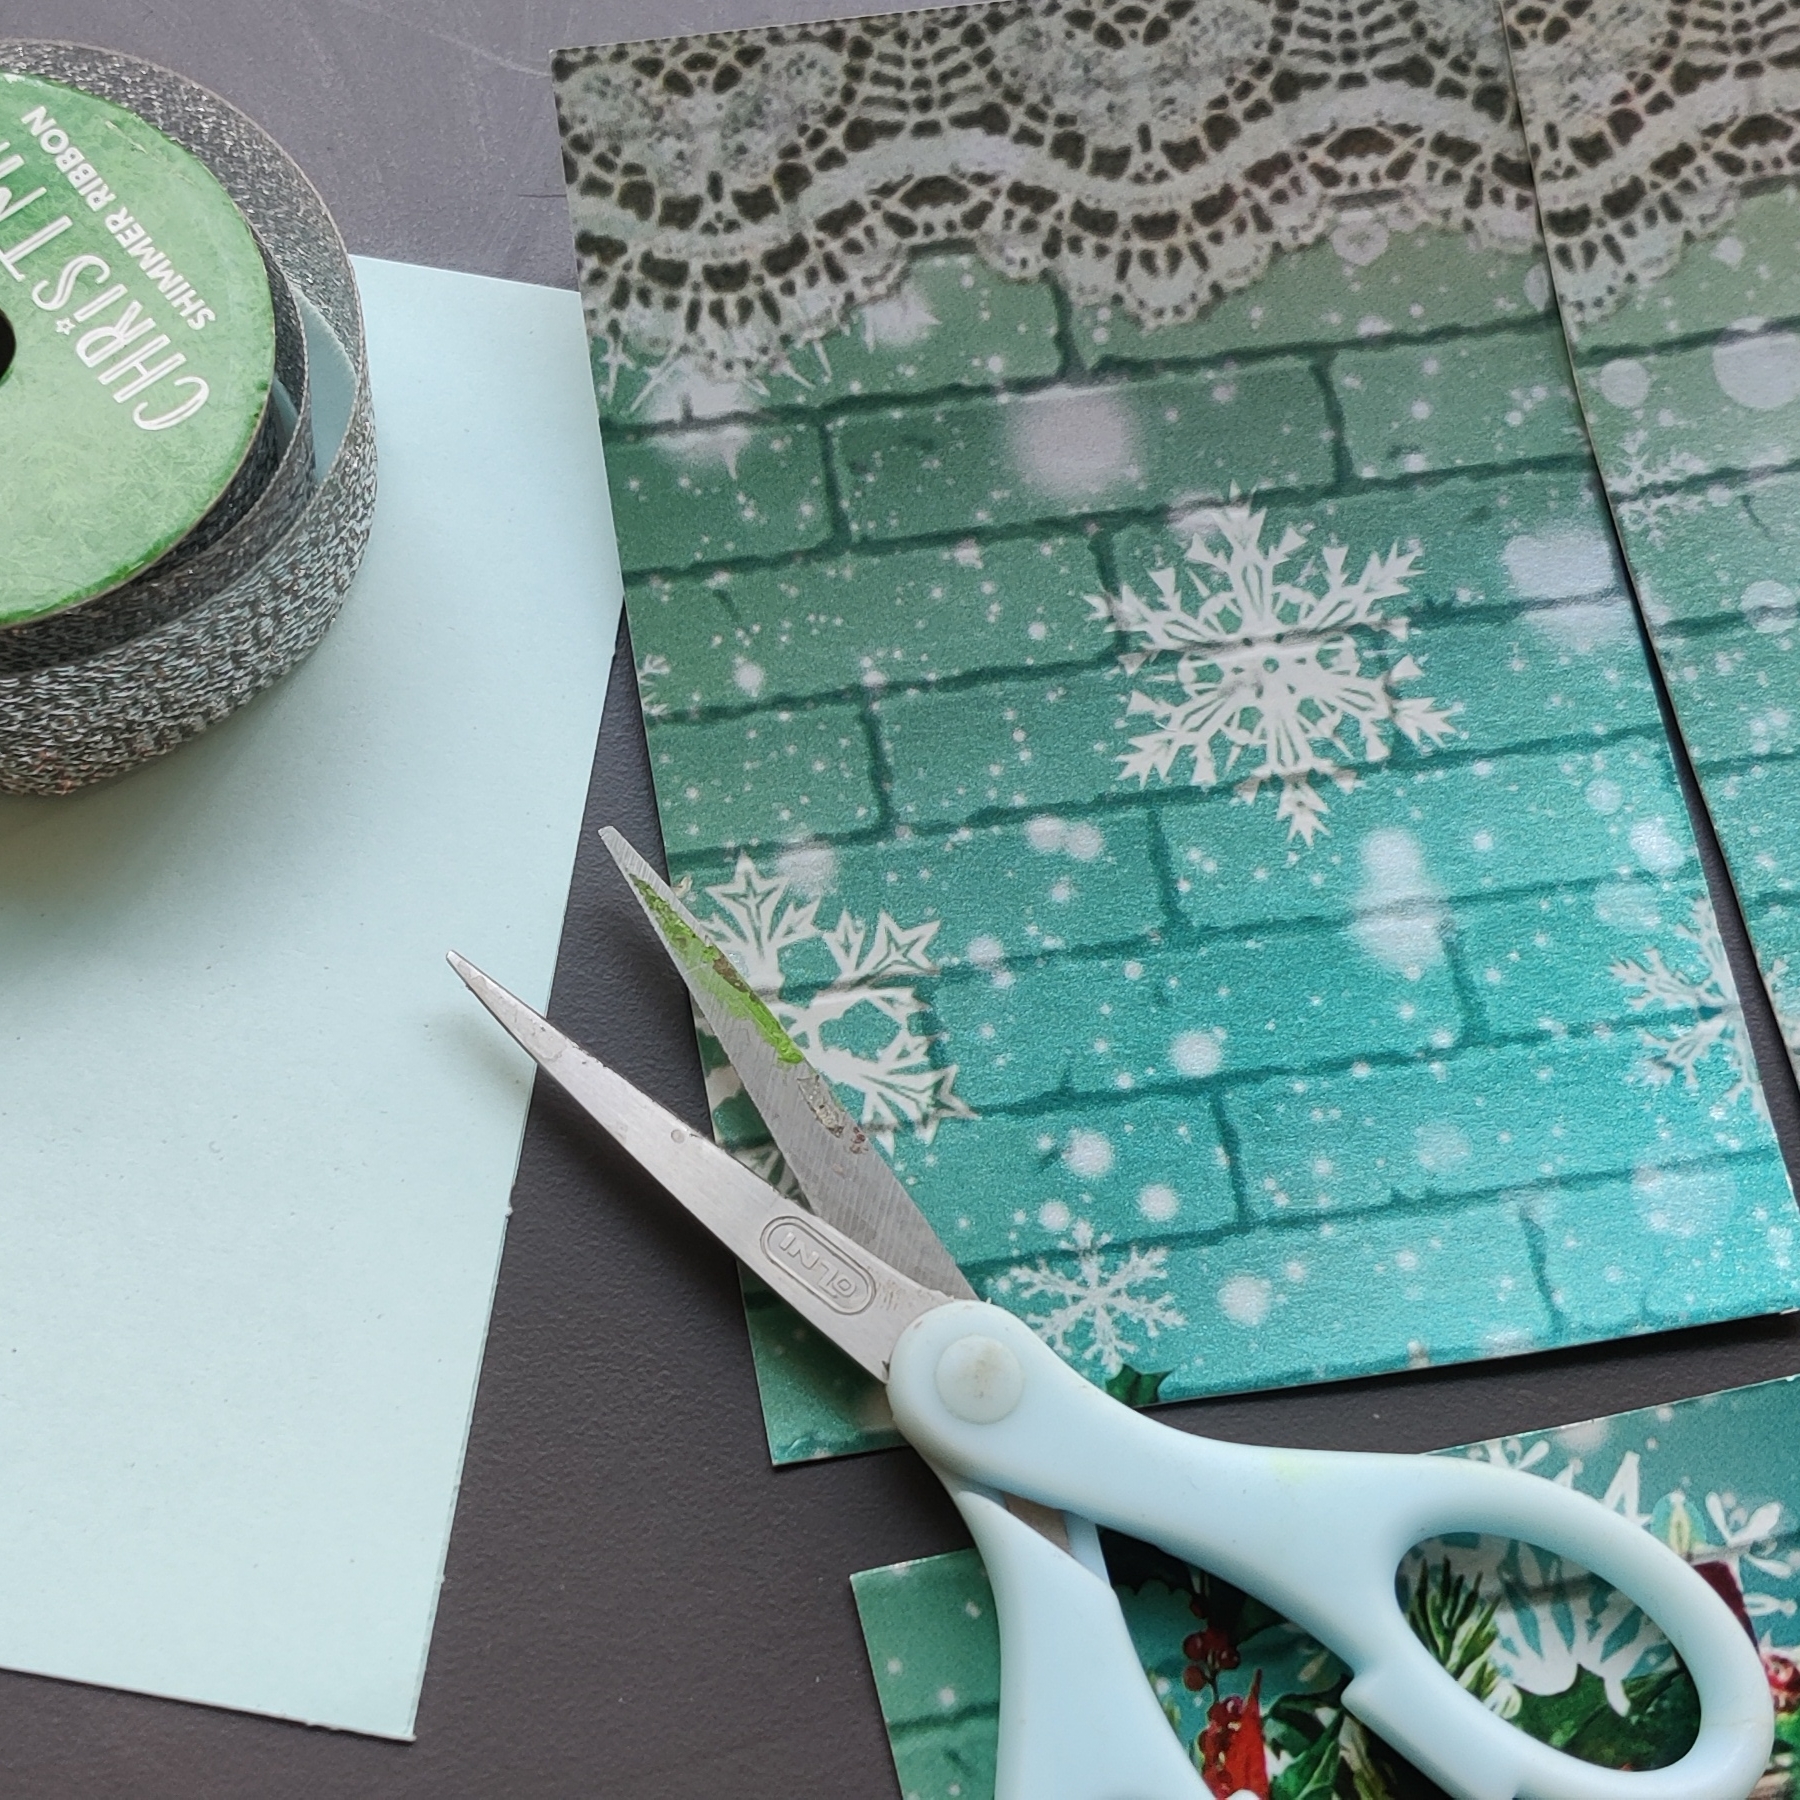 Adding Snow Texture to your Christmas Cards with Modeling Paste